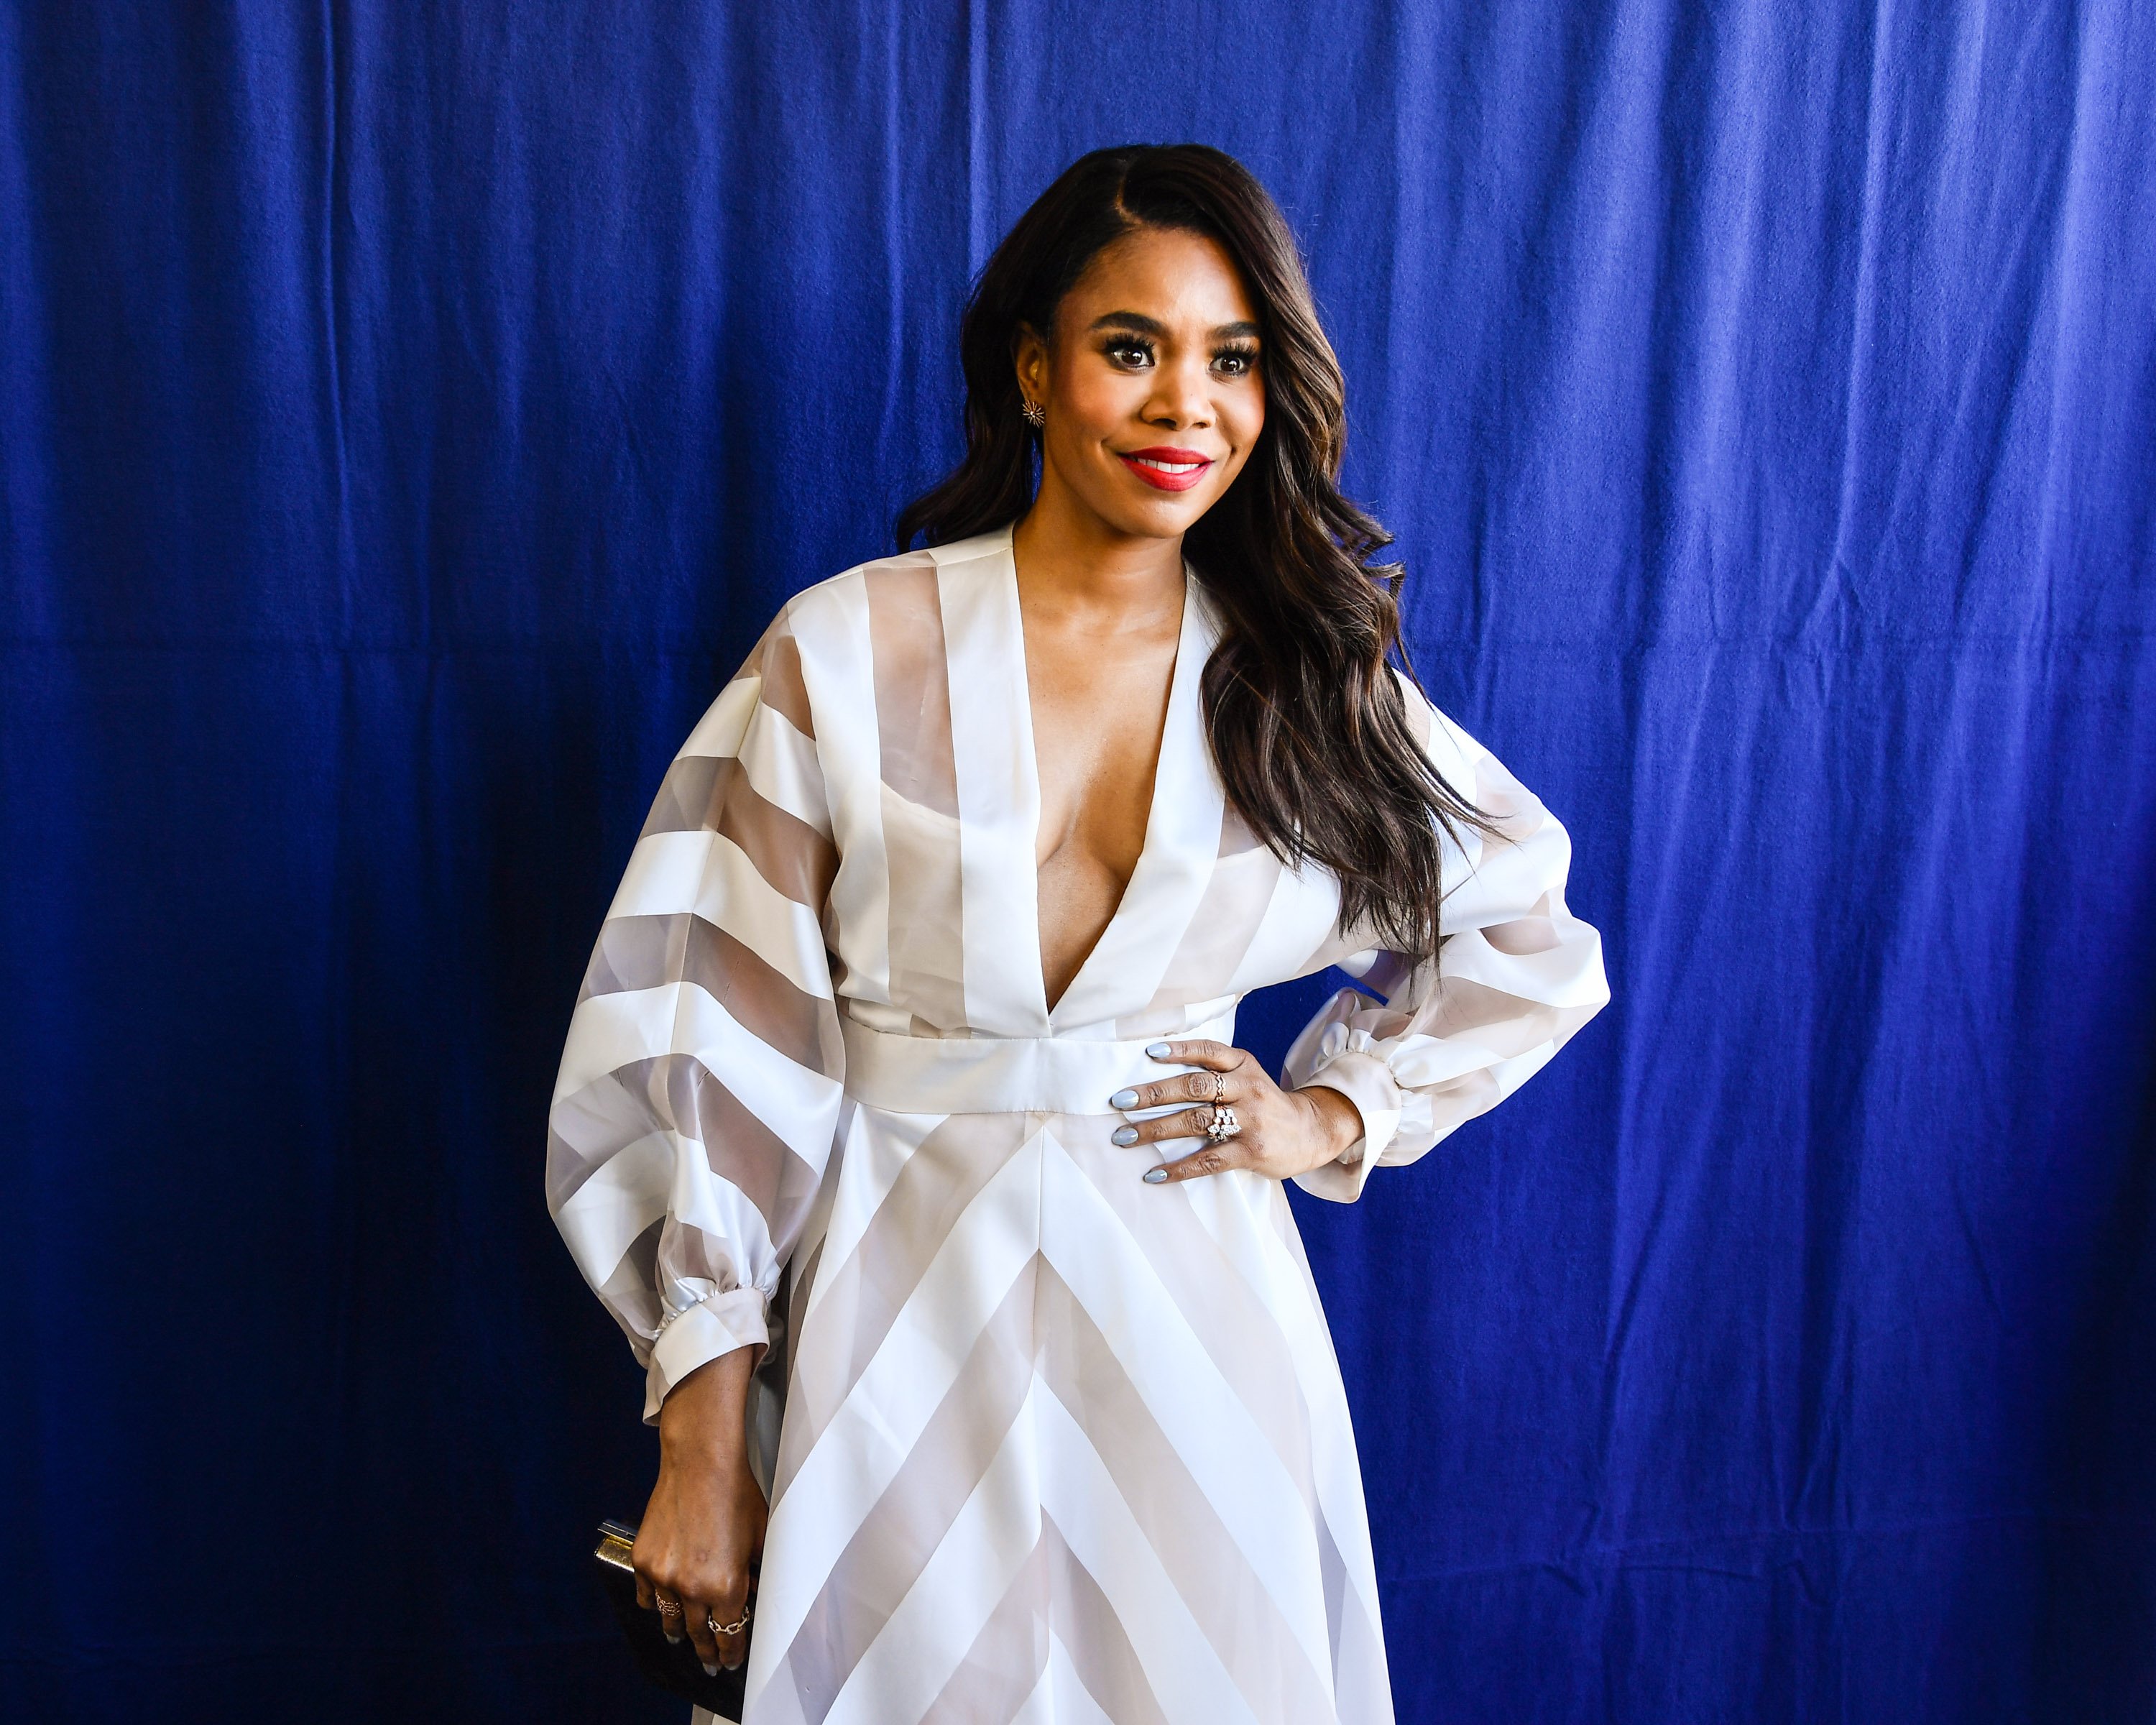 Regina Hall at the 2019 Film Independent Spirit Awards on February 23, 2019, in Santa Monica, California. | Source: Getty Images